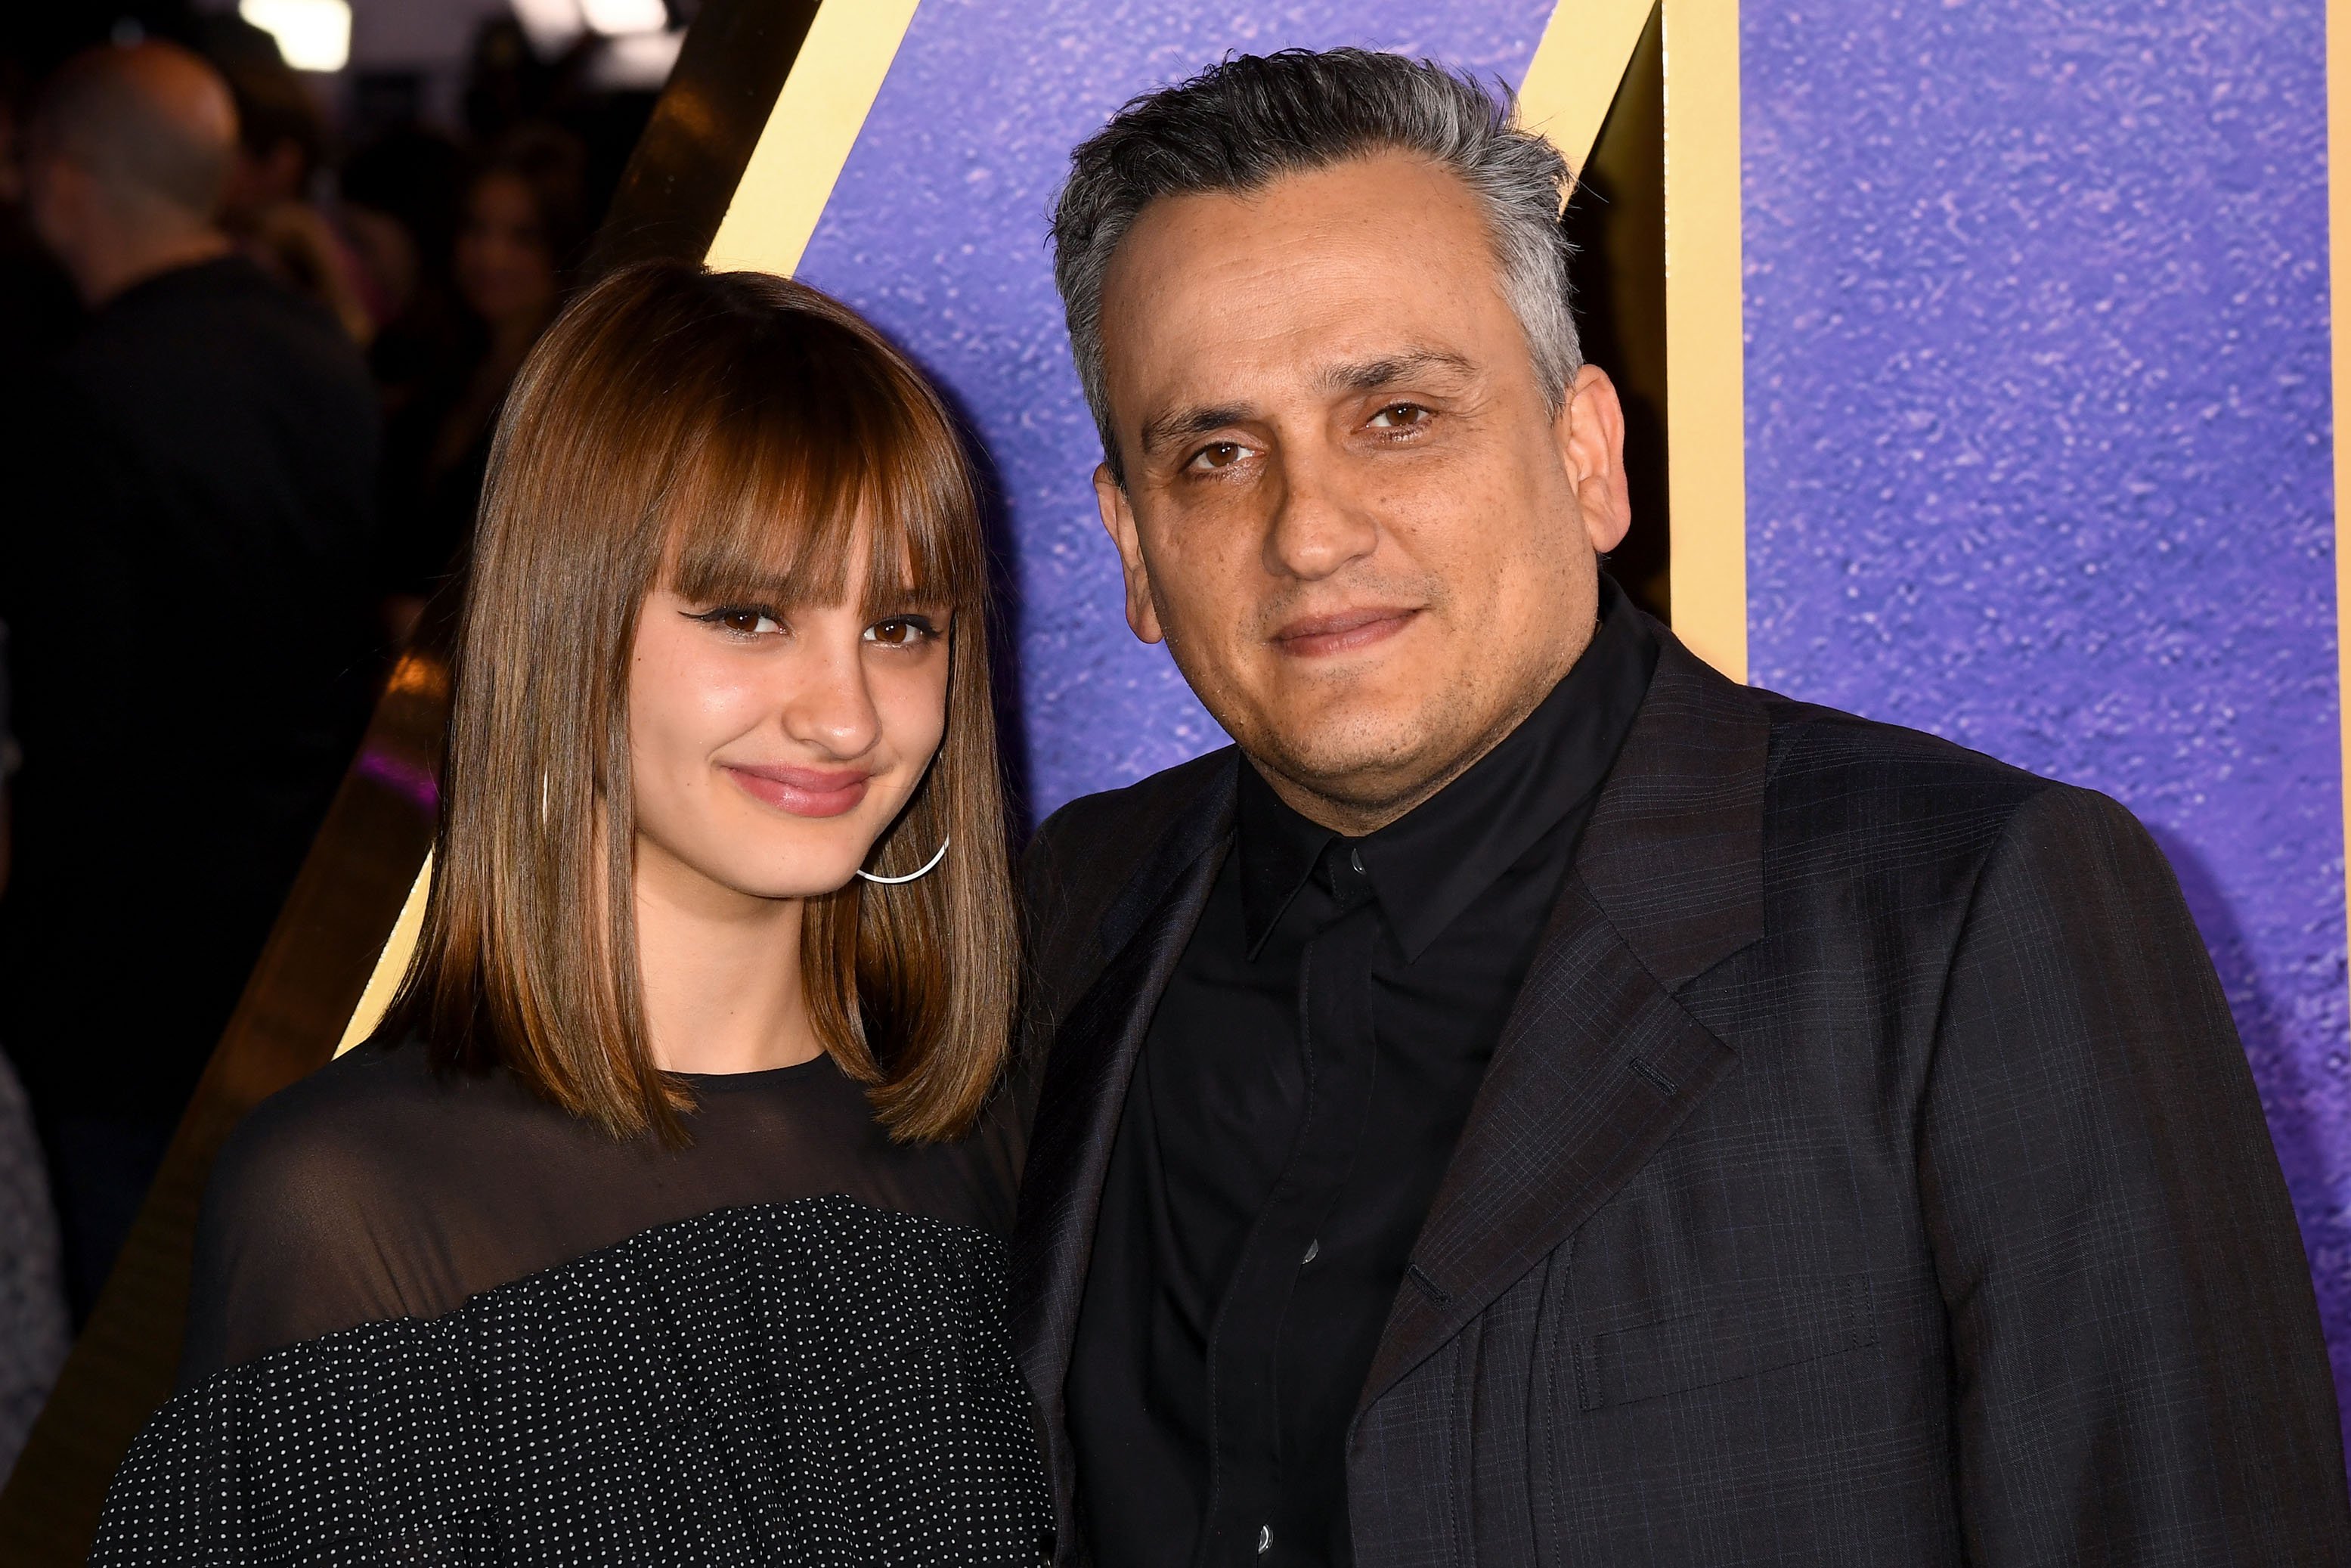 Ava Russo and Joe Russo attend the 'Avengers Endgame' UK Fan Event on April 10, 2019 in London, England.